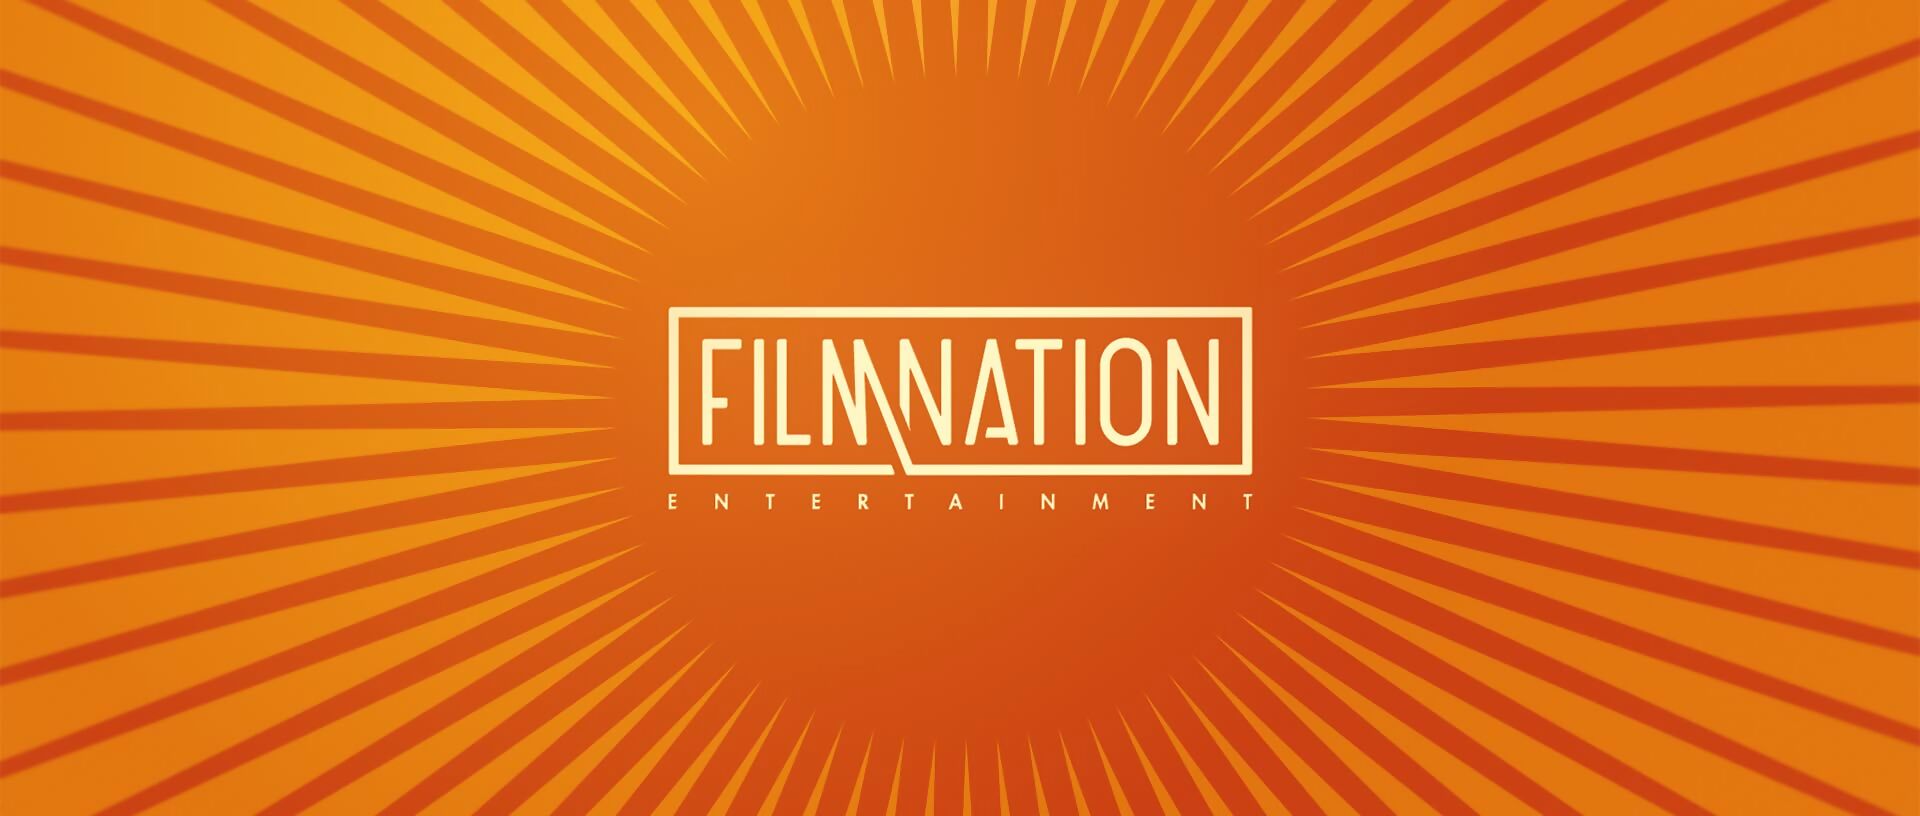 FilmNation TV UK partners with BBC and North East Screen to drive production in the region